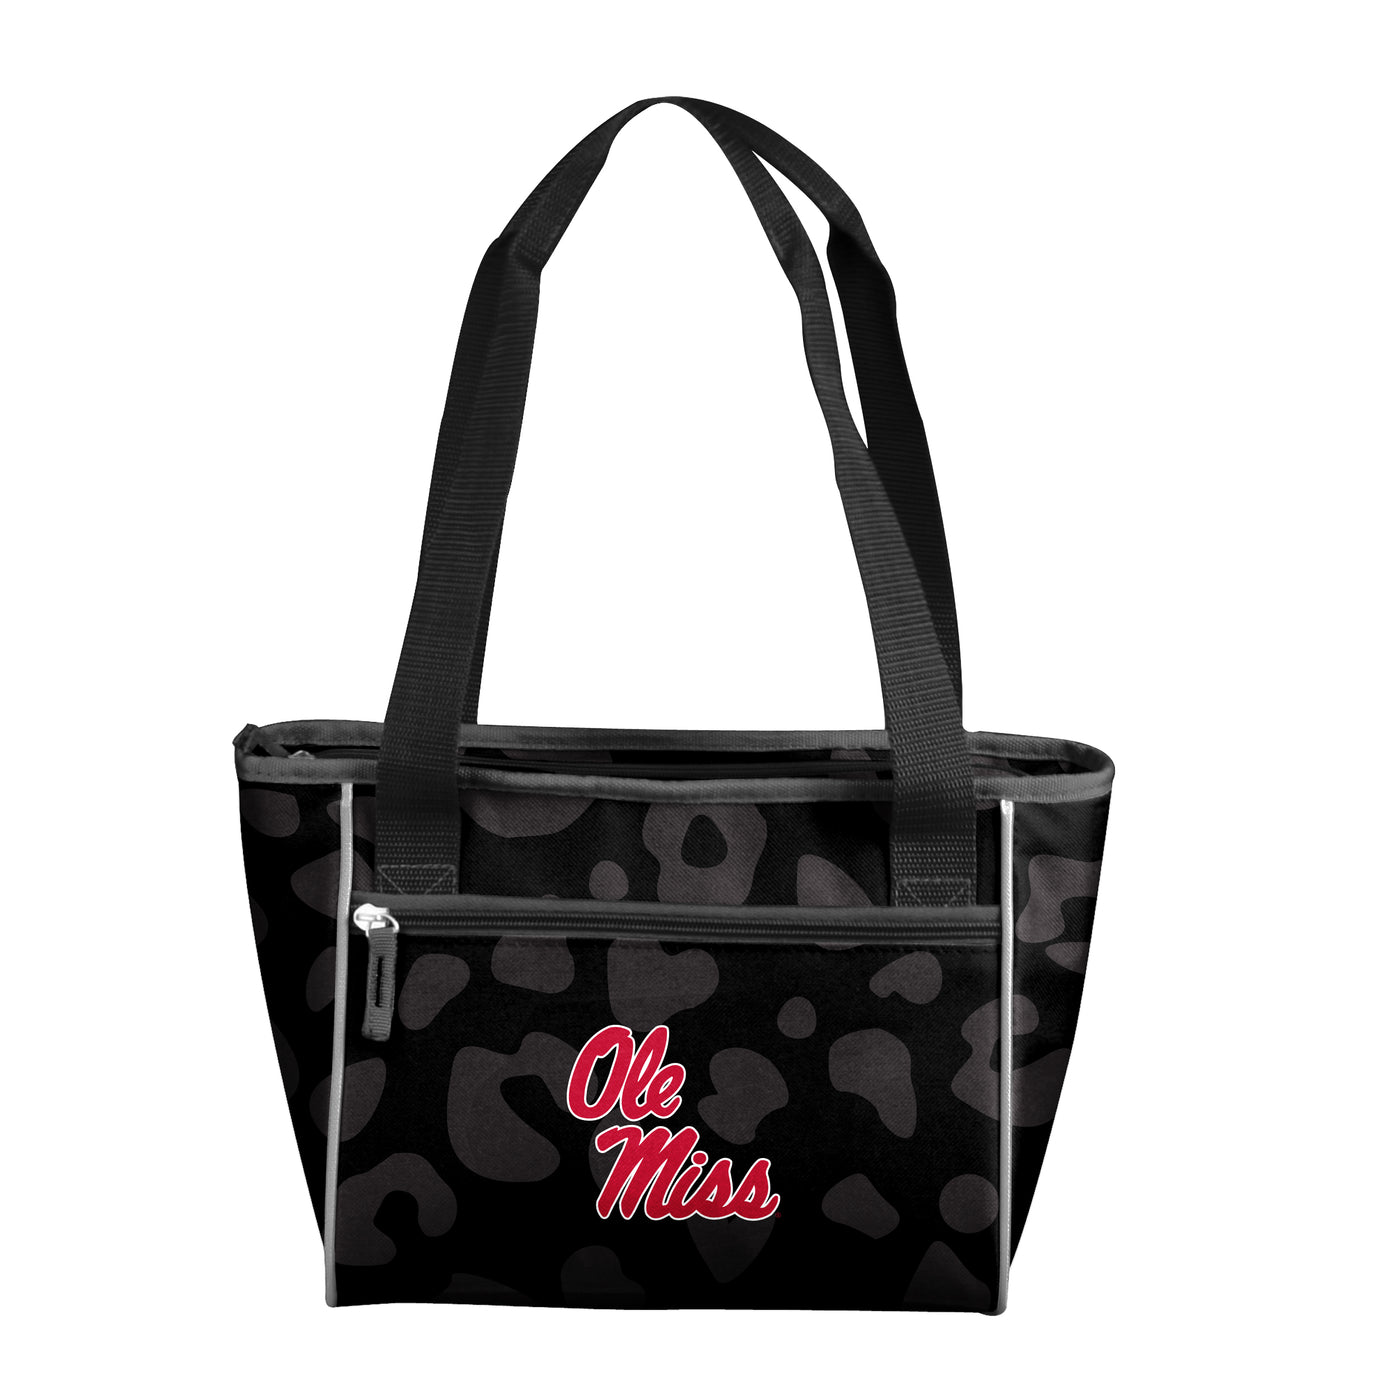 Ole Miss Leopard Print 16 Can Cooler Tote